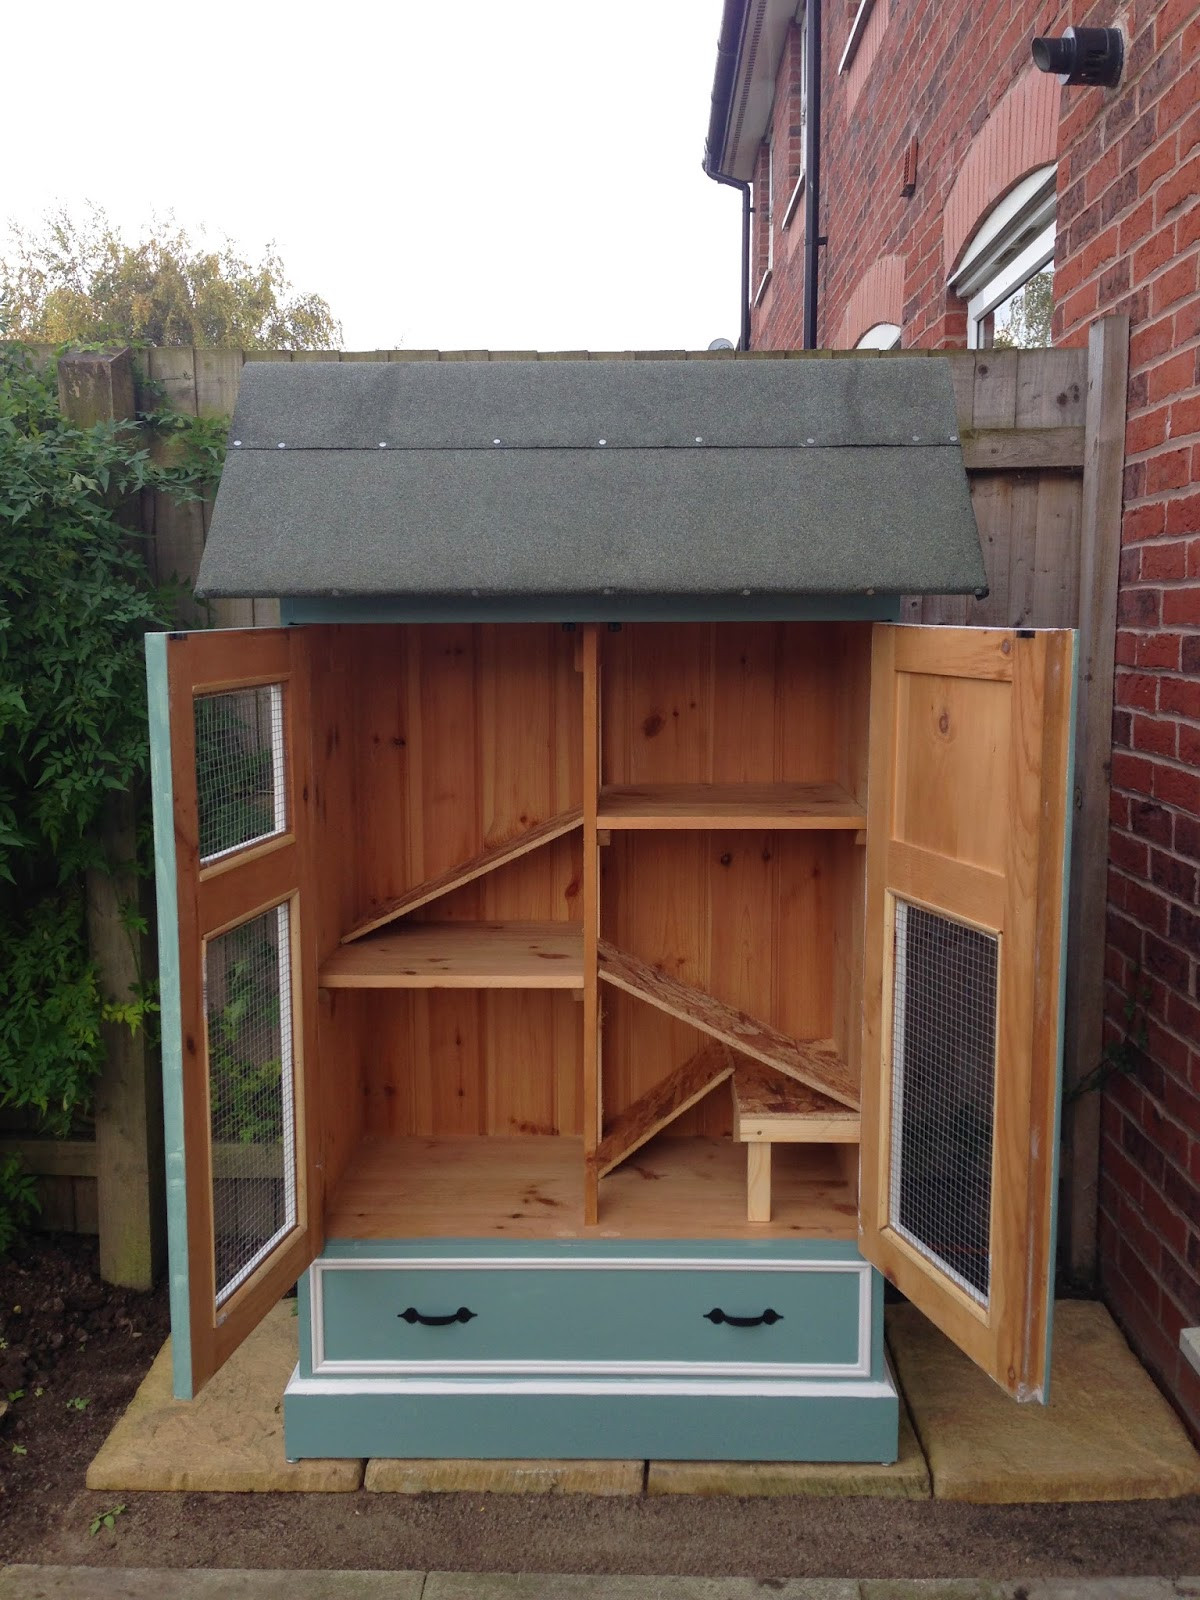 DIY Outdoor Rabbit Hutch
 10 DIY Rabbit Hutches From Upcycled Furniture Total Survival